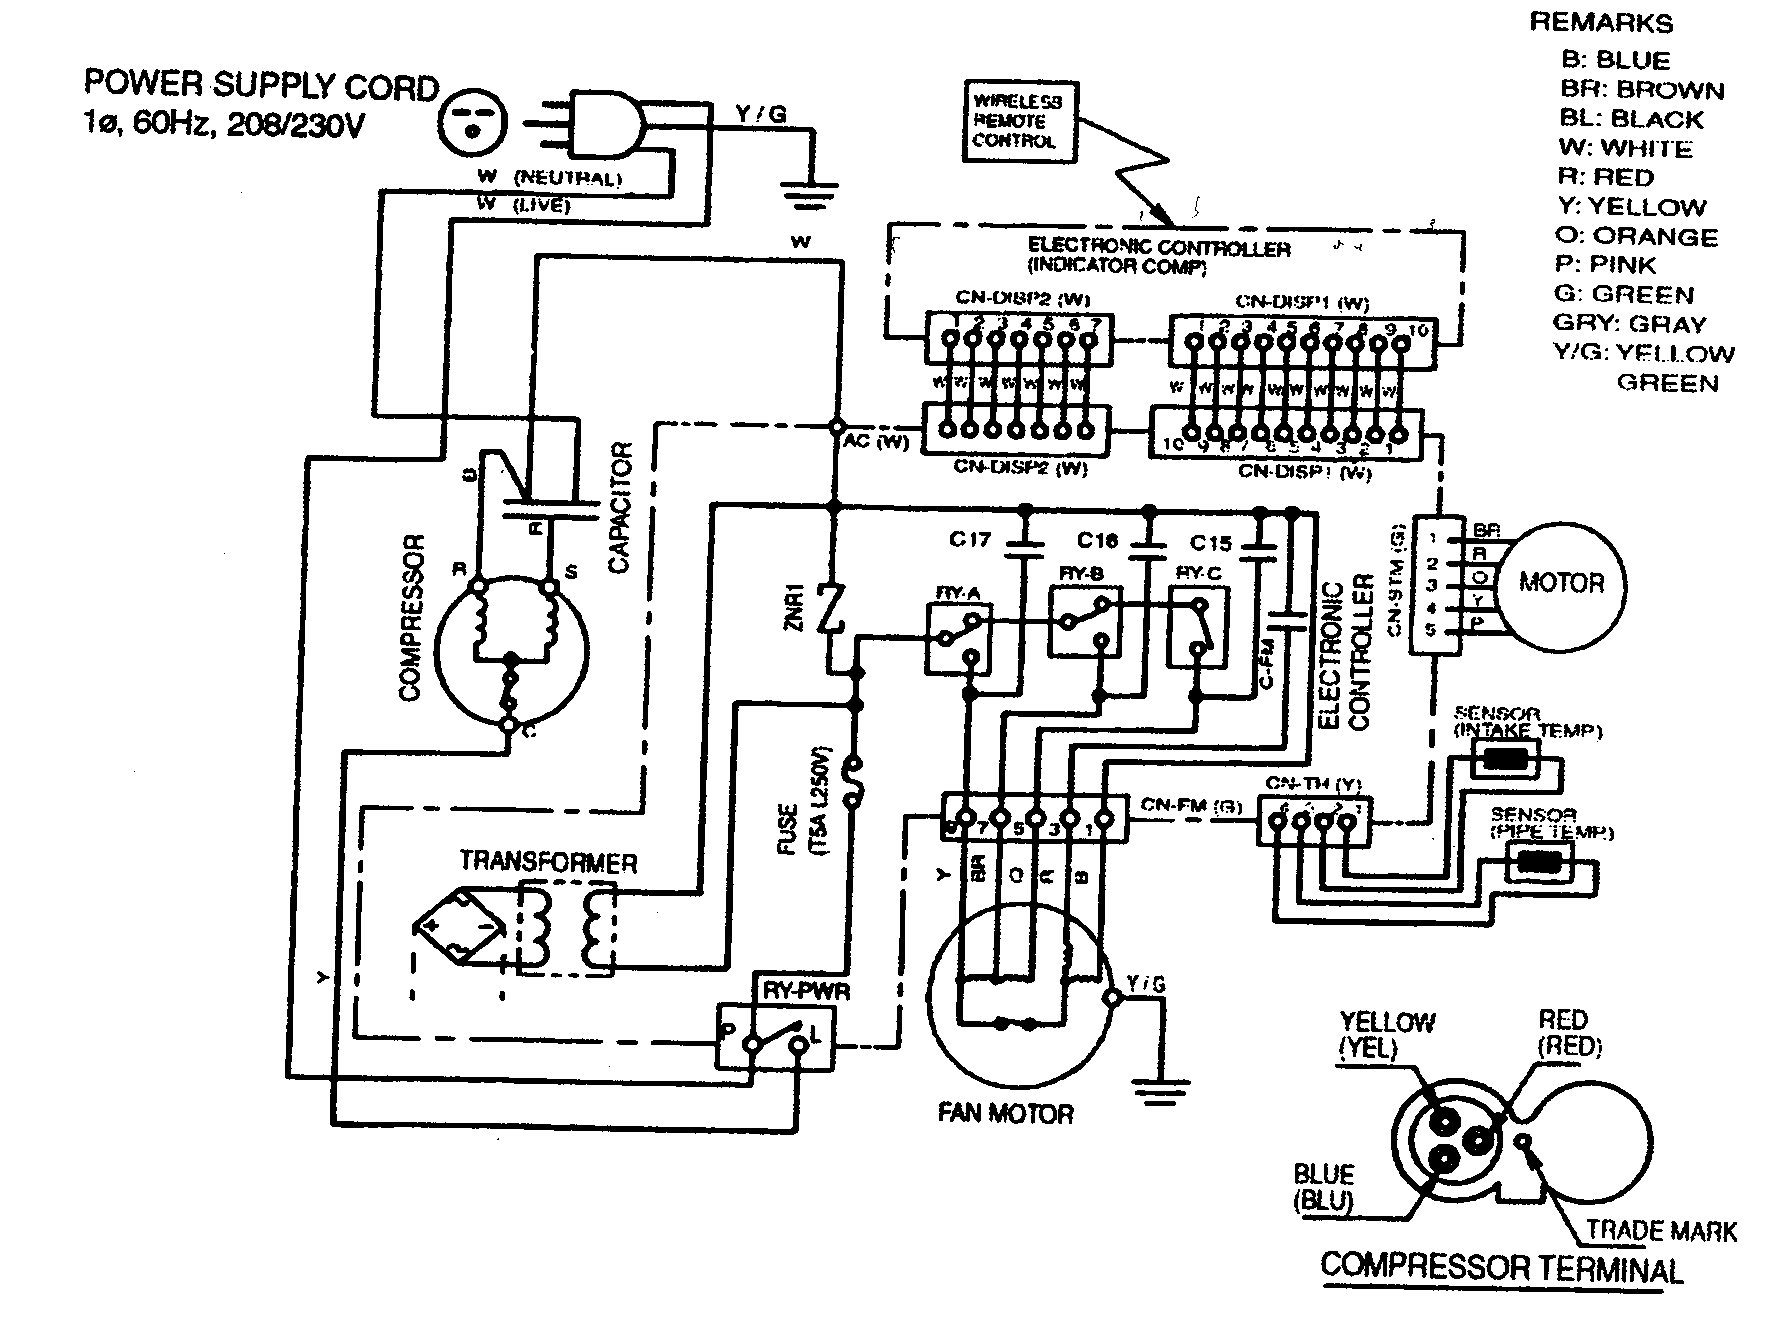 Window Air Conditioner Wiring Diagram from c.searspartsdirect.com